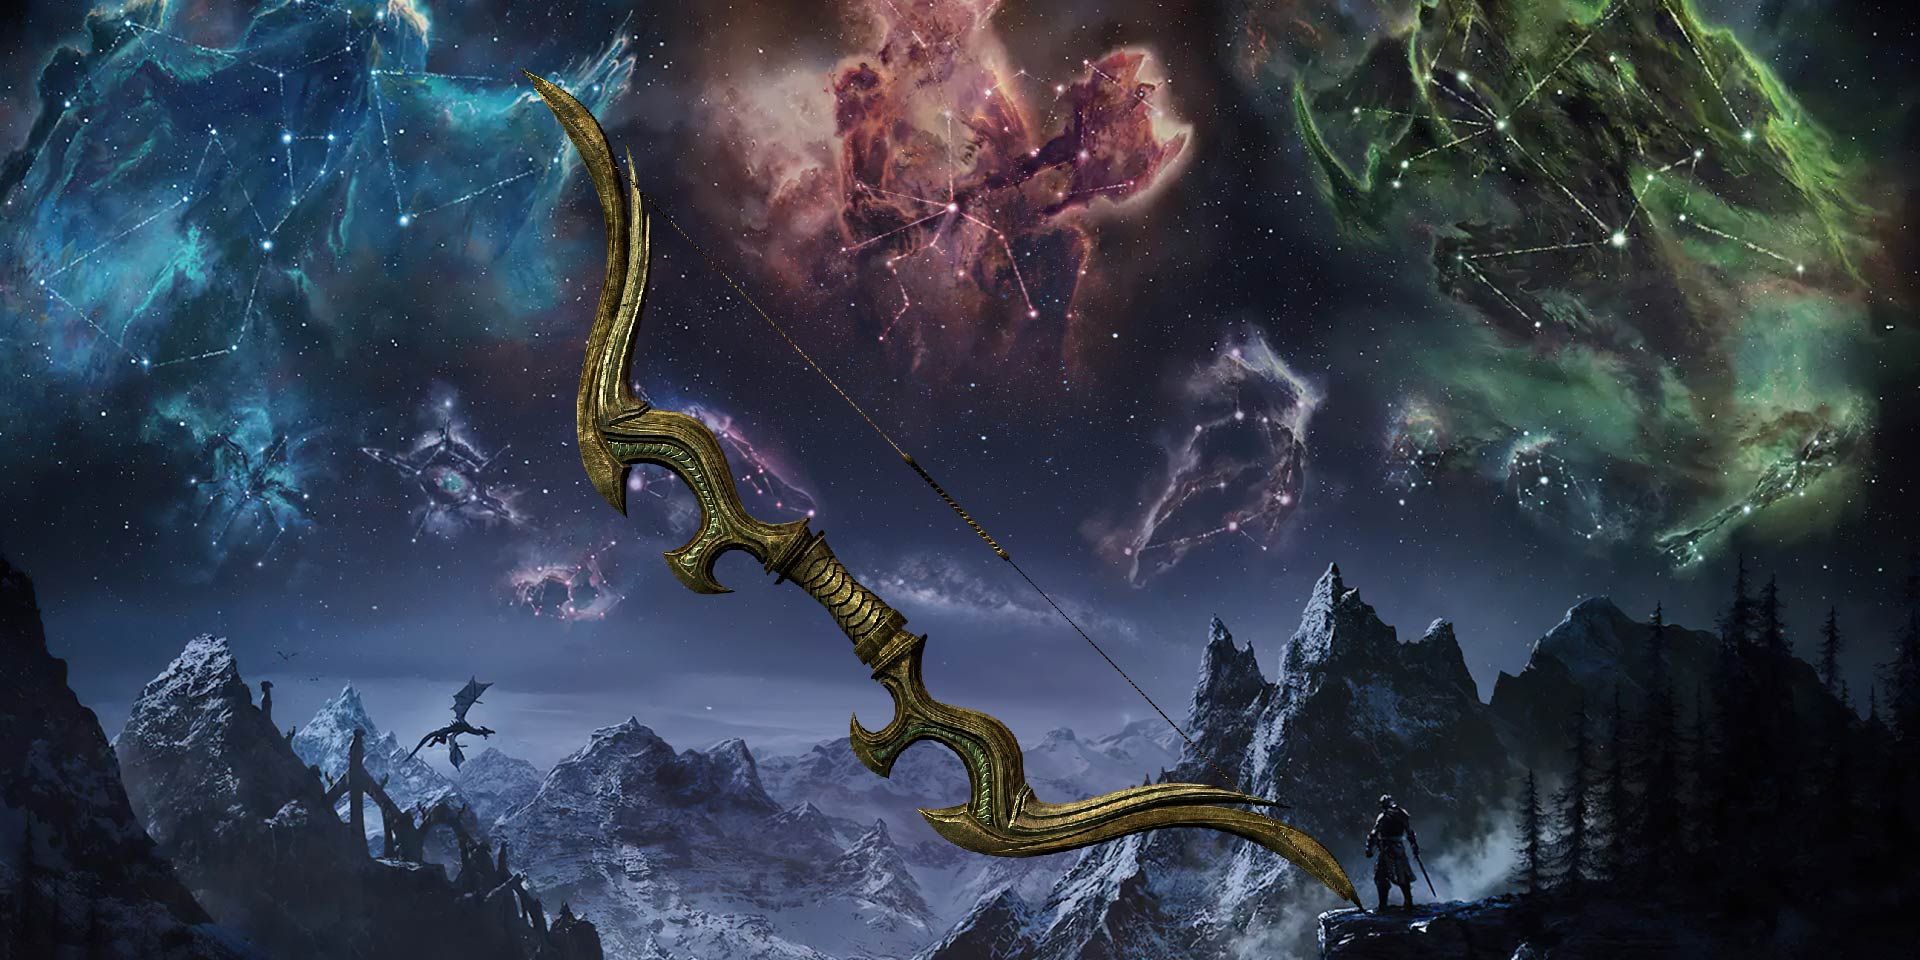 The Glass Bow of the Stag Prince among mountains and Elder Scrolls star signs.